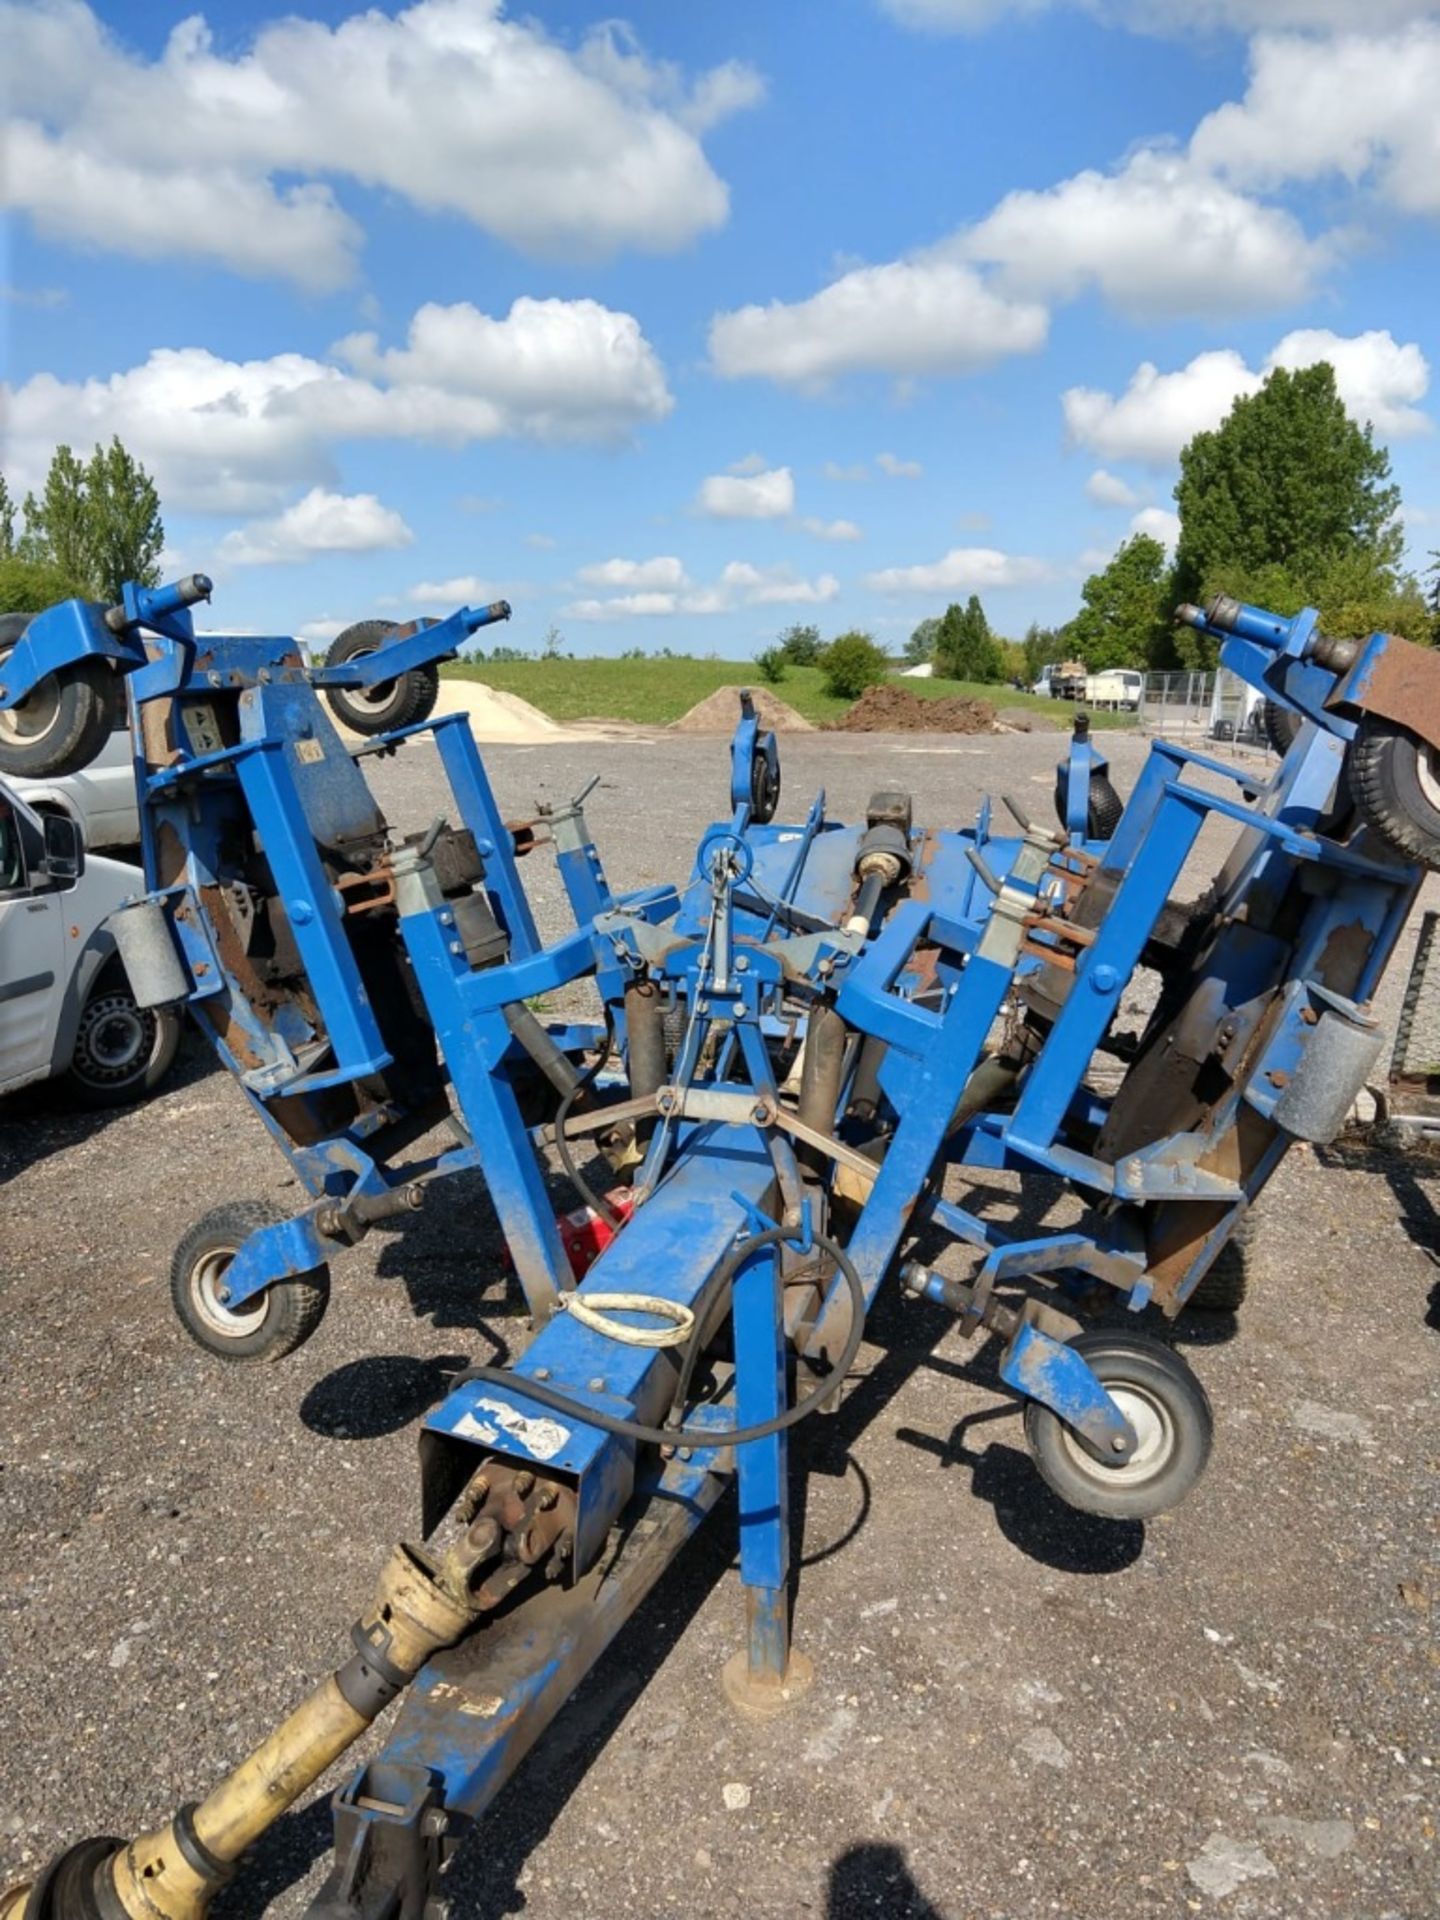 PORT AGRIC NIMROD 12 TRAILED BATWING ROTARY MOWER SET. DIRECT FROM GOLF CLUB, CURRENTLY USED